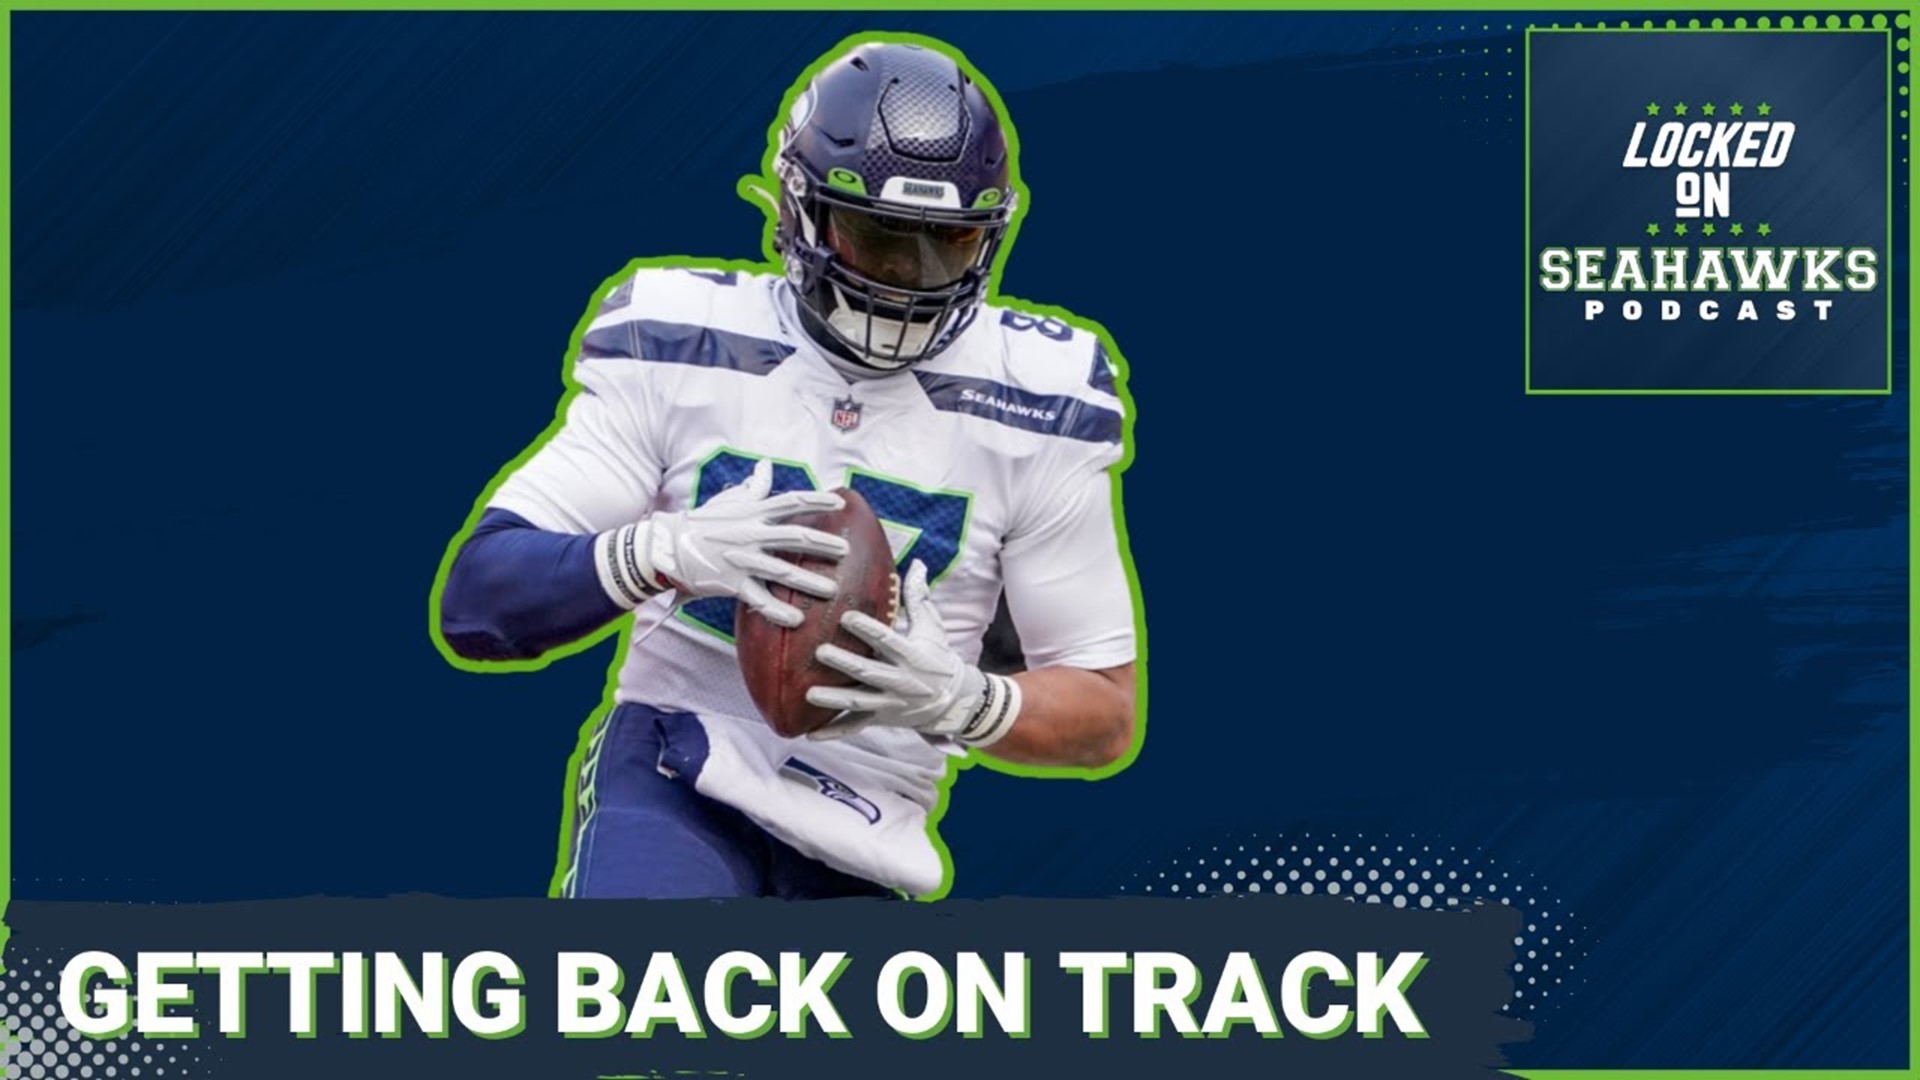 Though they still remain in the hunt in the NFC West and wild card race, the next four weeks will determine how the 2023 season ultimately unfolds